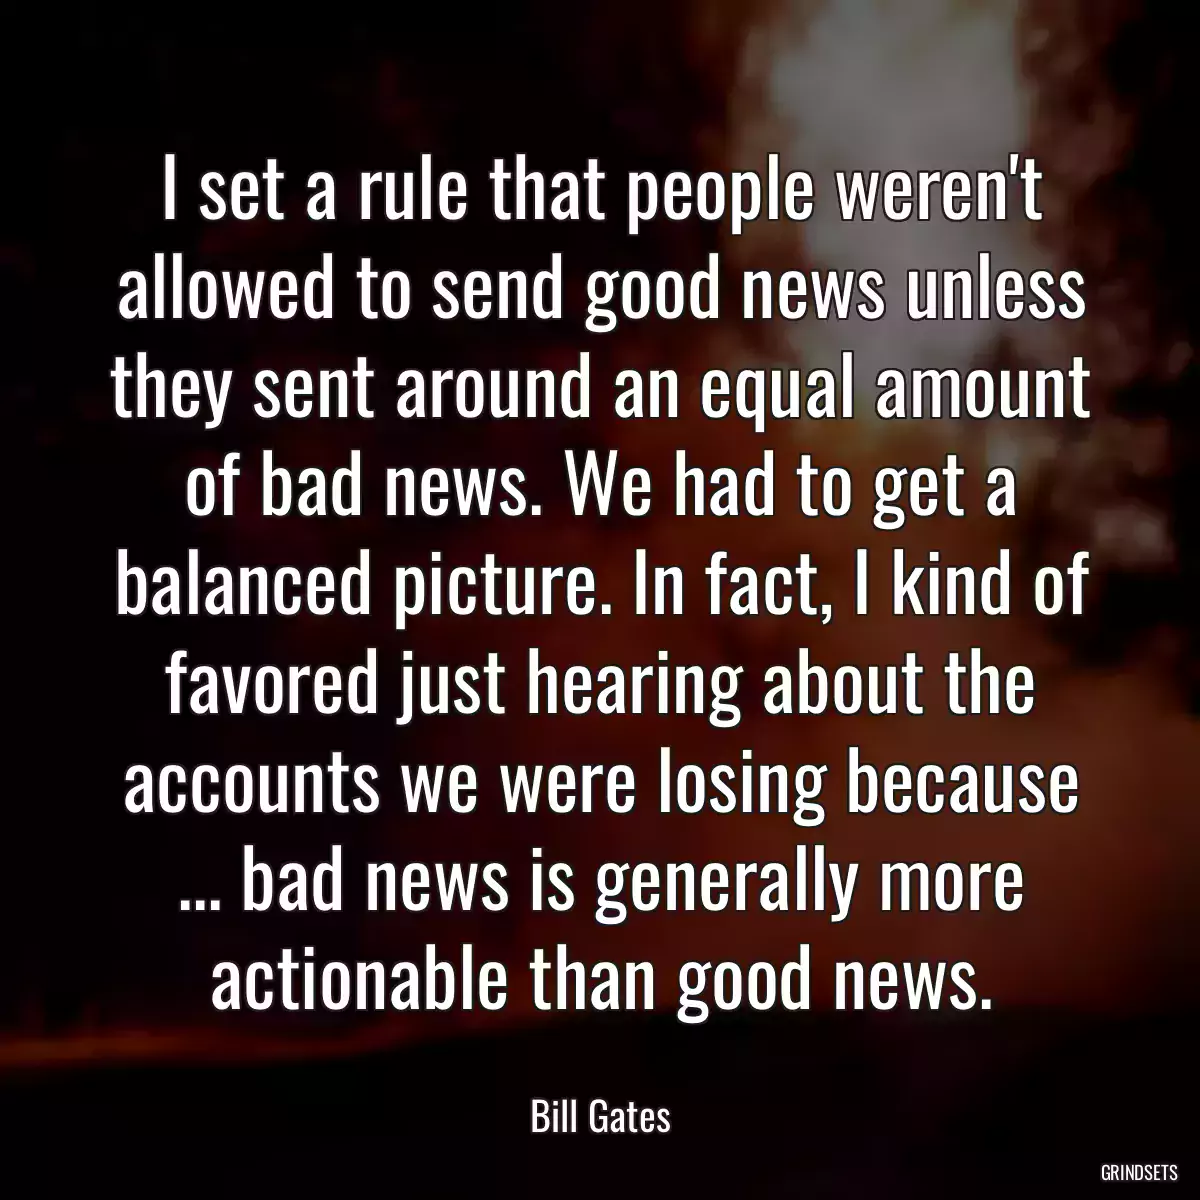 I set a rule that people weren\'t allowed to send good news unless they sent around an equal amount of bad news. We had to get a balanced picture. In fact, I kind of favored just hearing about the accounts we were losing because ... bad news is generally more actionable than good news.